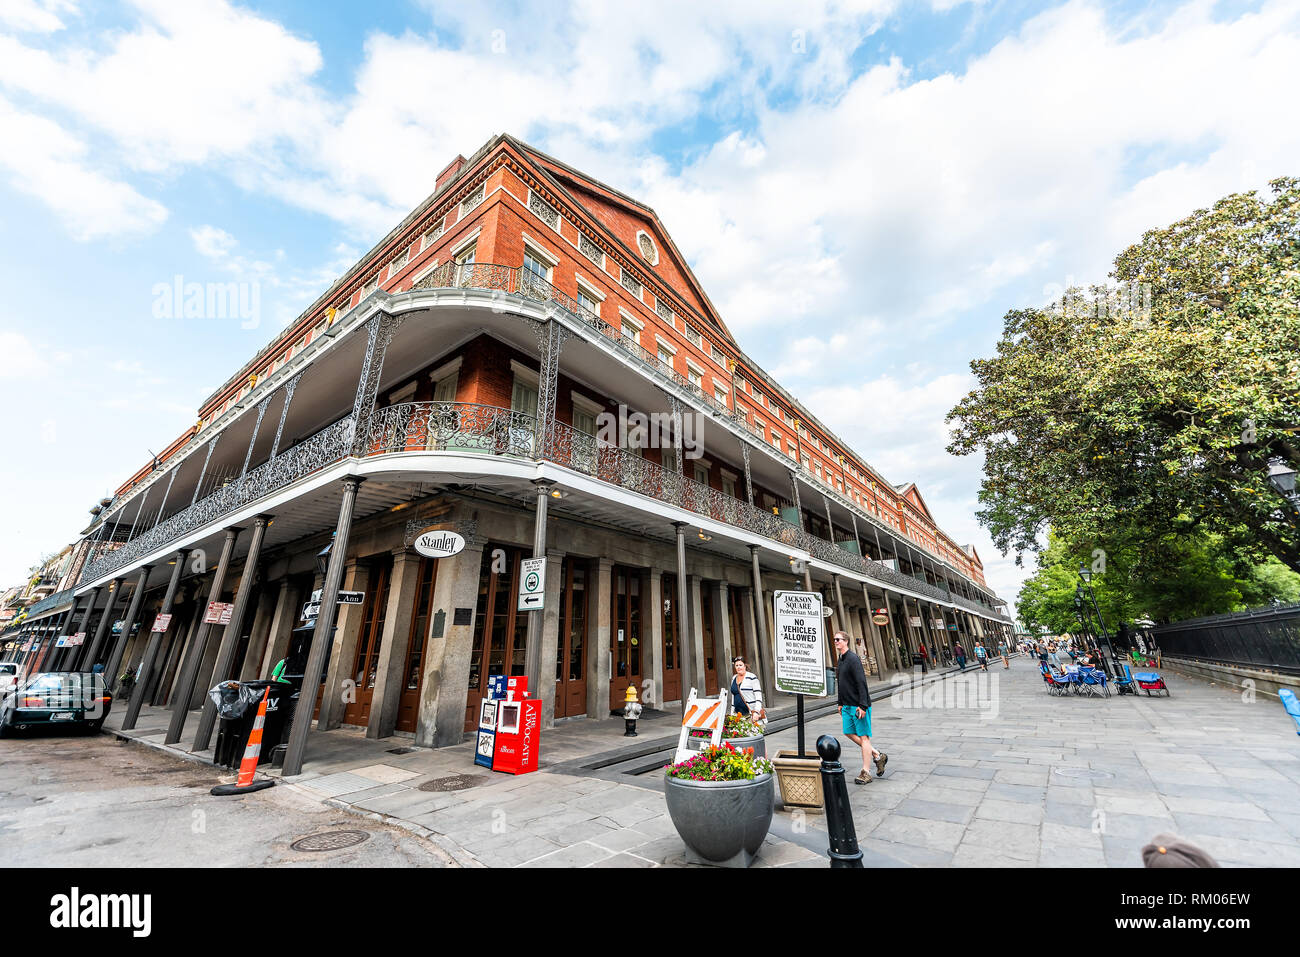 New Orleans, USA - April 23, 2018: Old town Chartres and St Ann street in Louisiana famous city shops in sunset evening day with cast iron balconies r Stock Photo